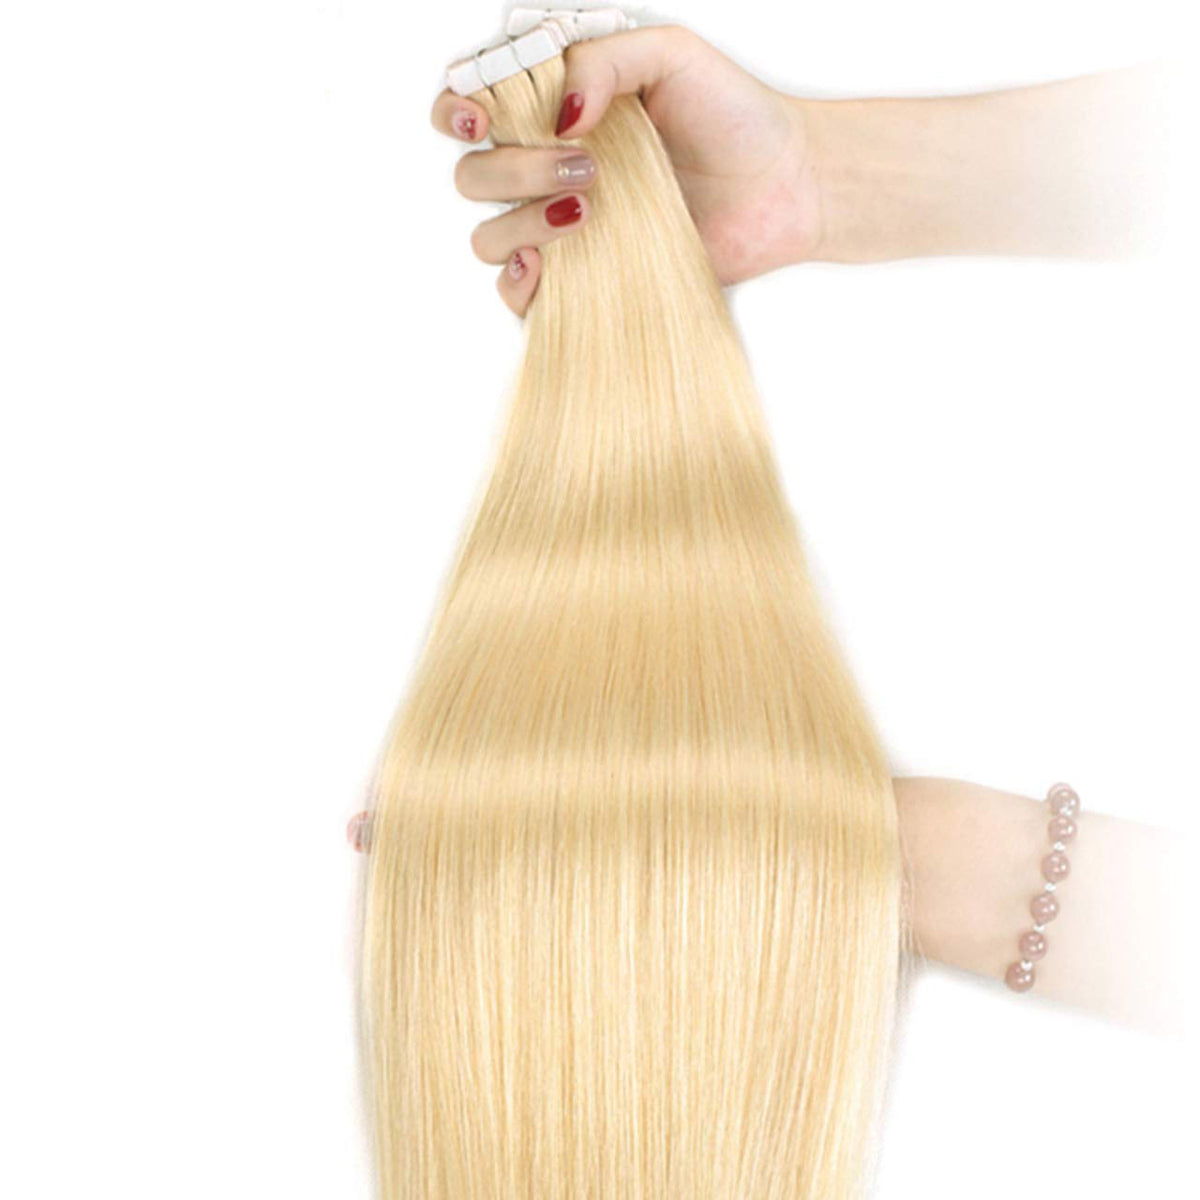 16 inch Remy Tape in Human Hair Extensions Natural PU Skin Weft Real Human Hair #22 Medium Blonde